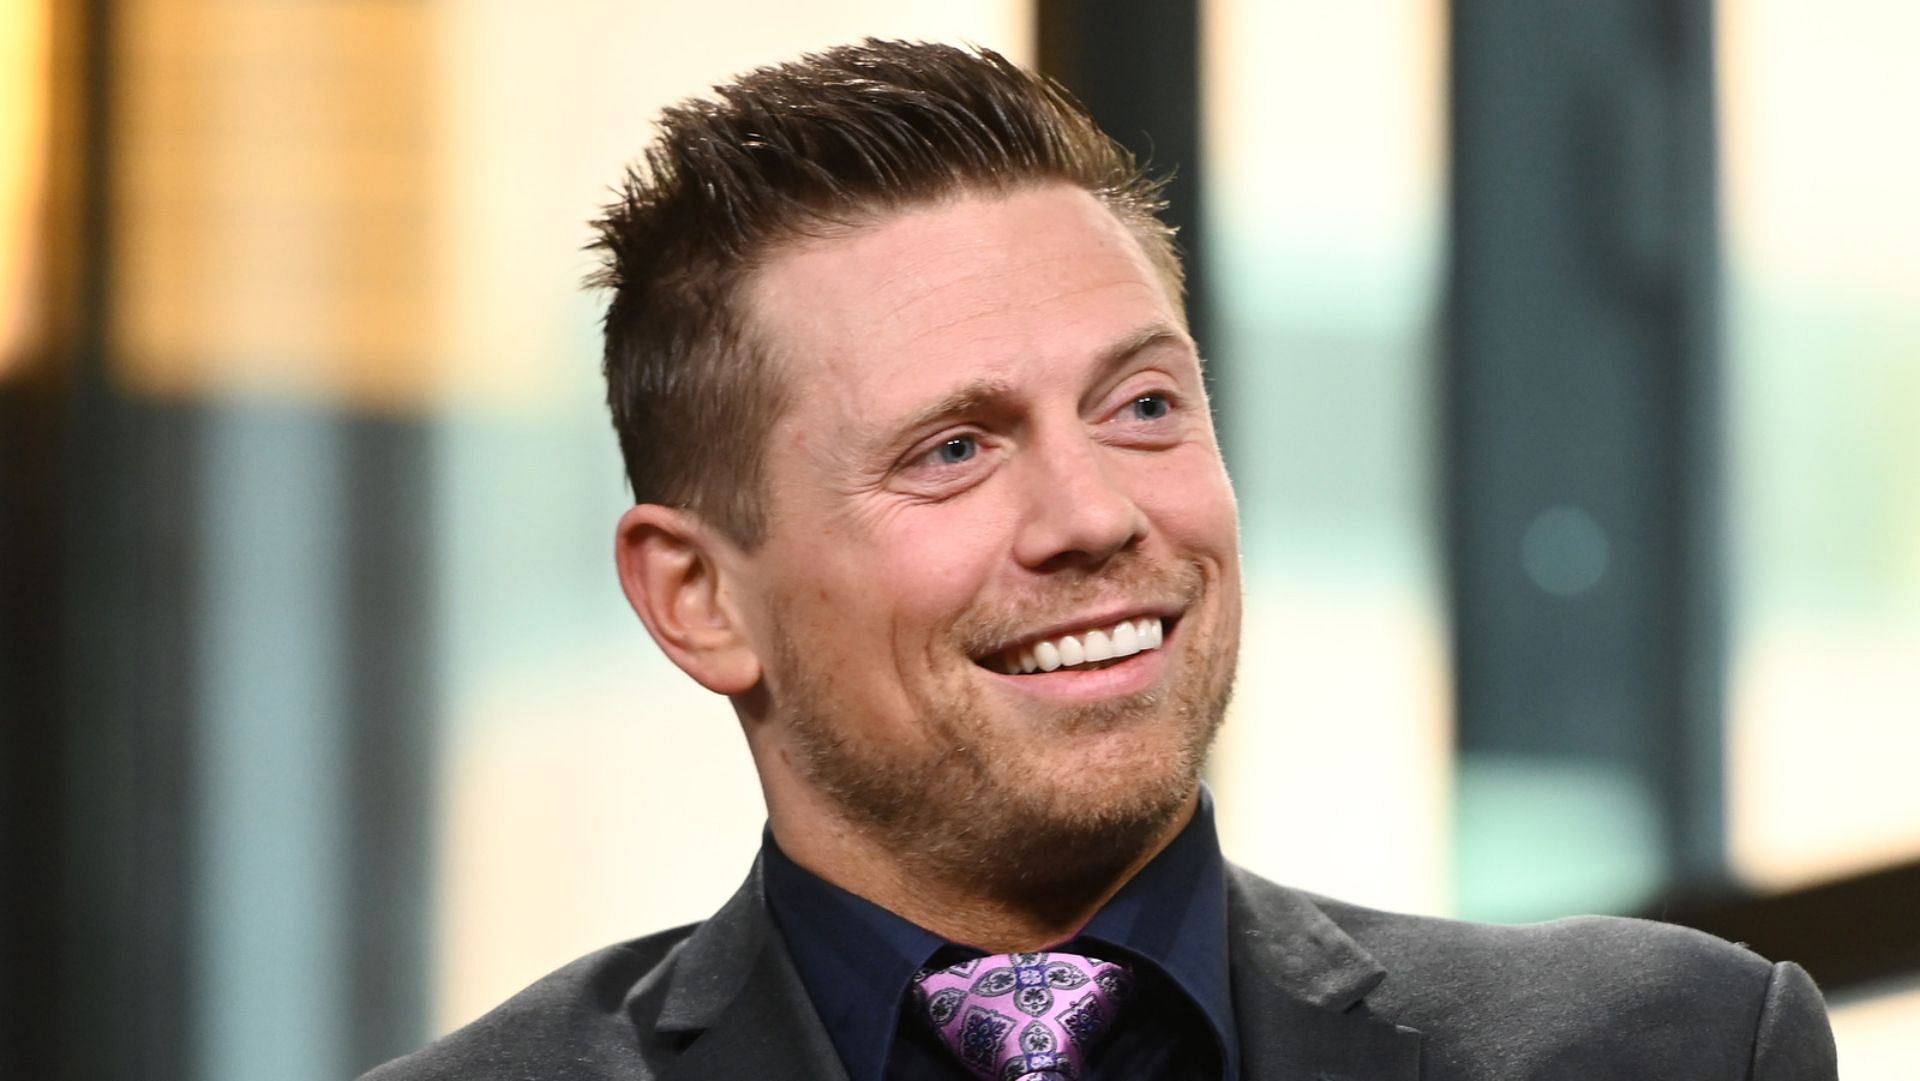 The Miz shares how he feels about WWE superstars getting released.